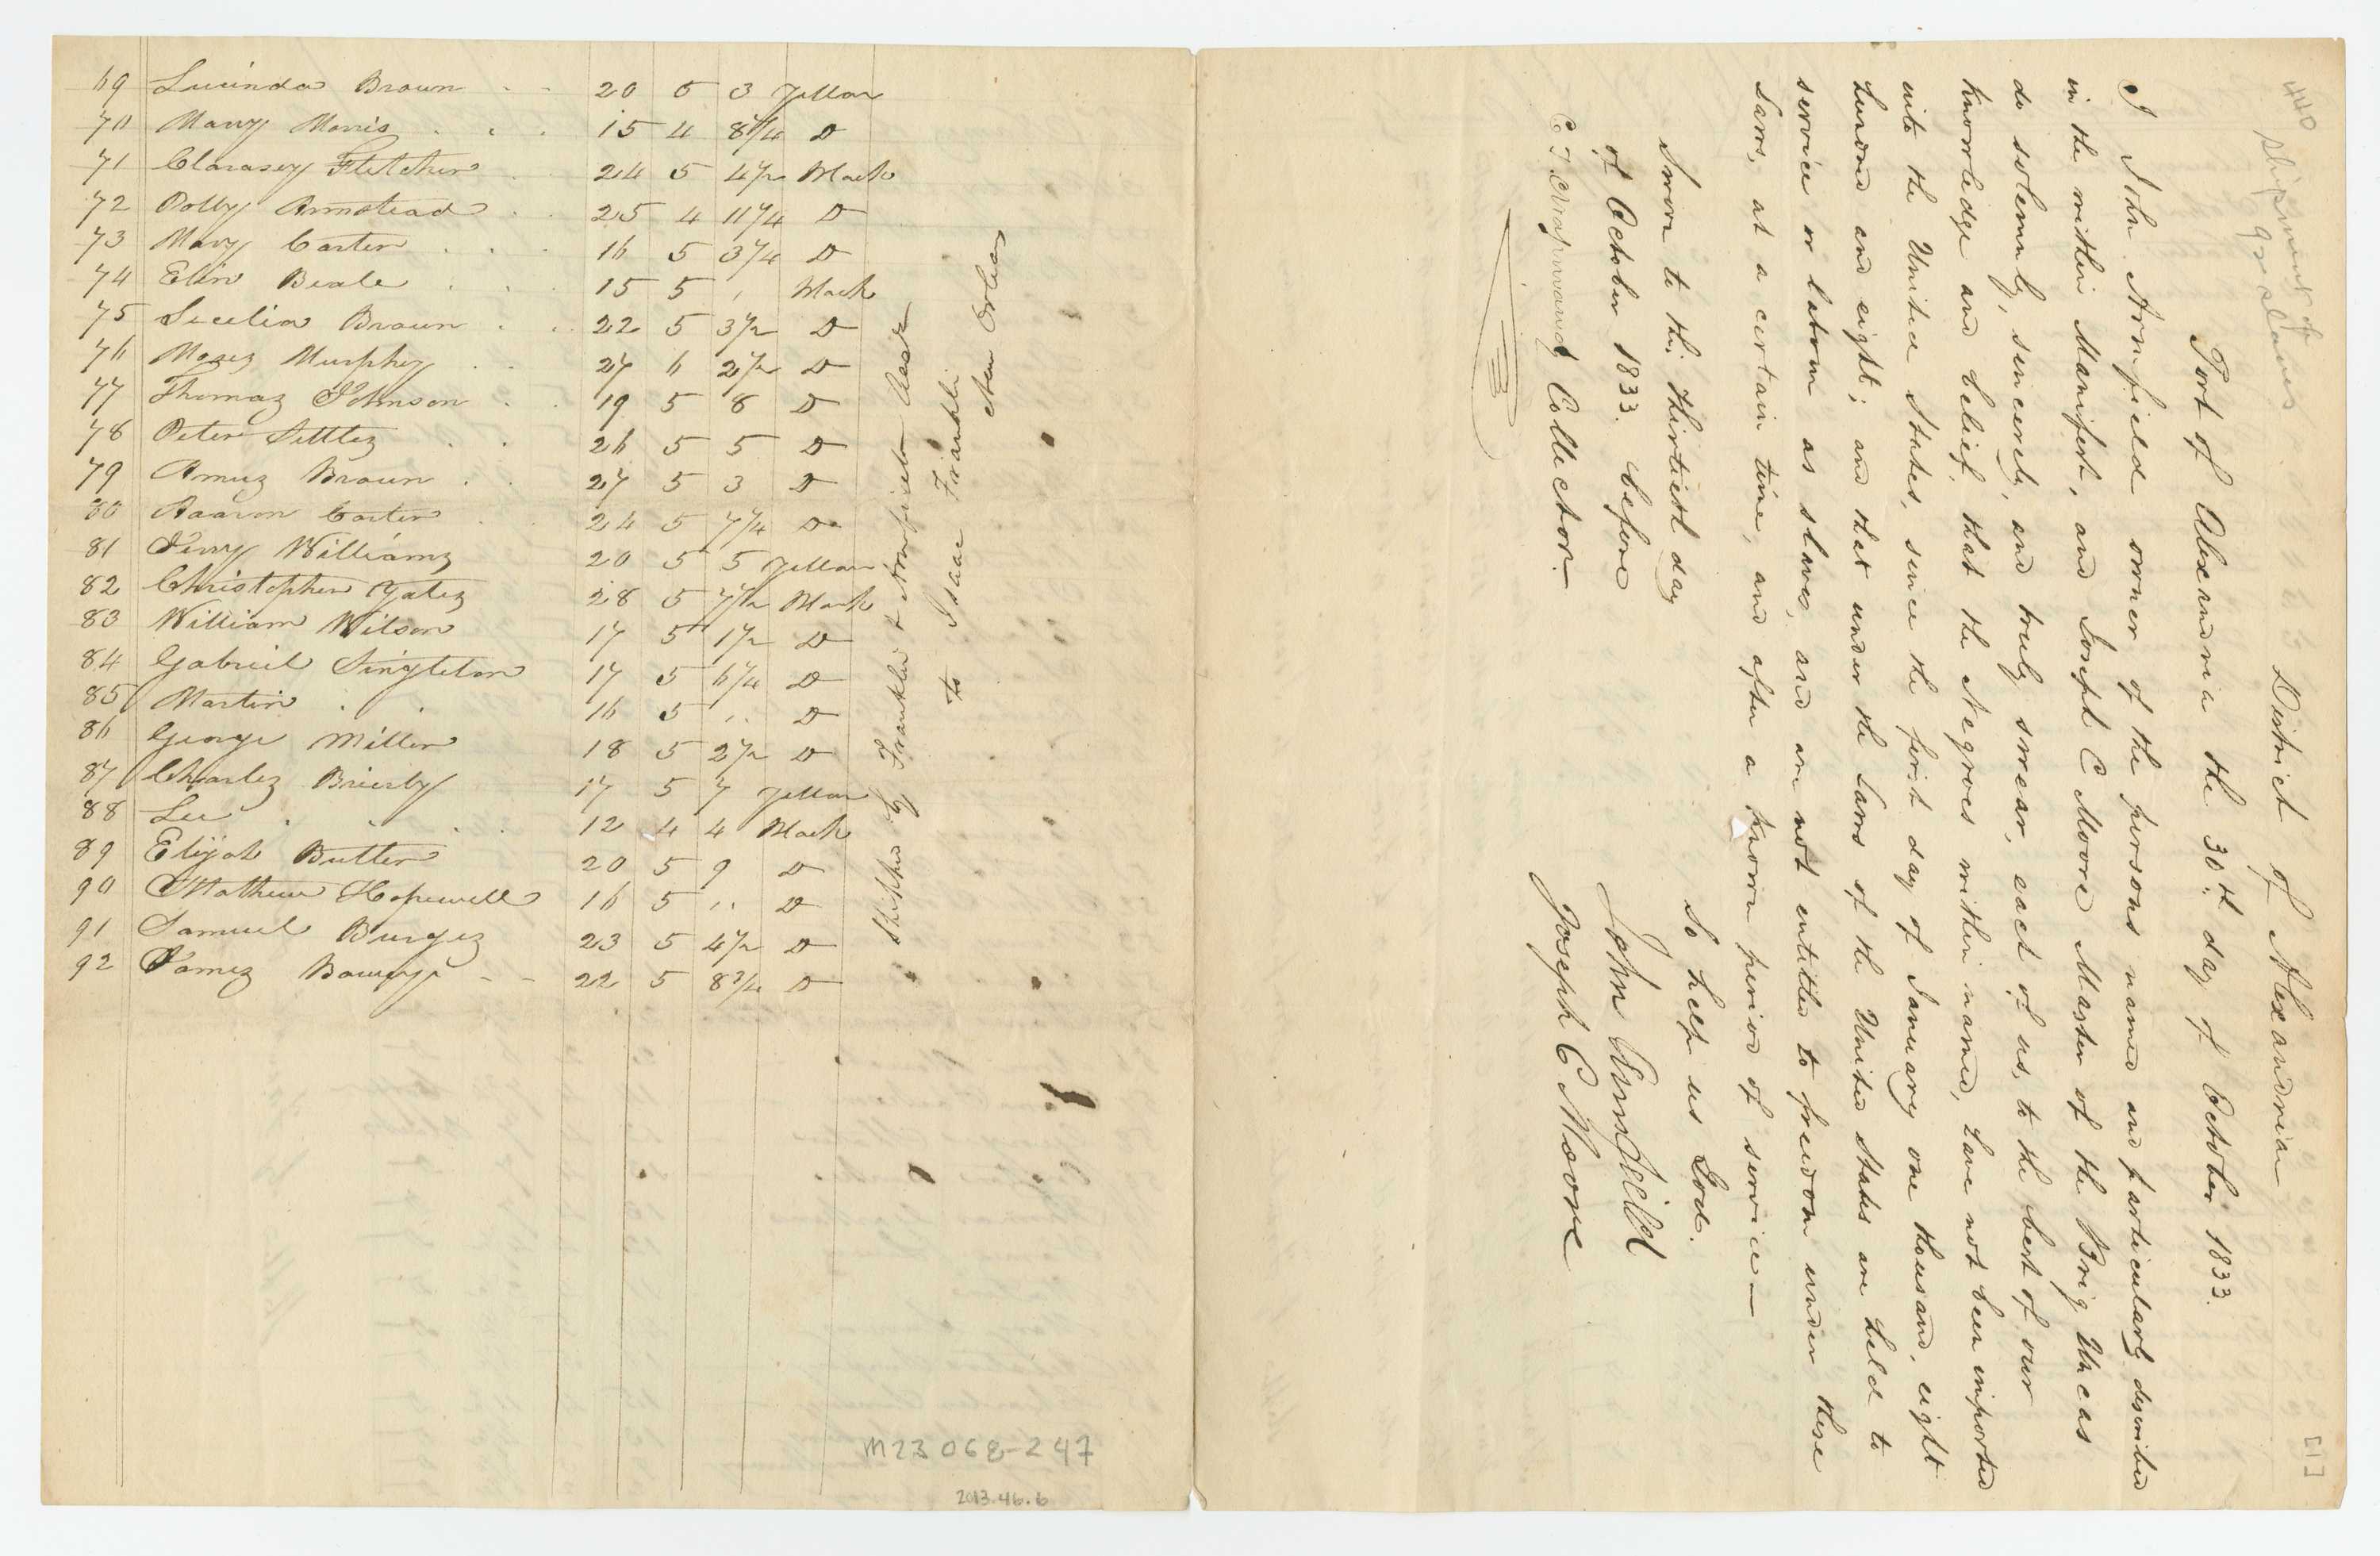 A handwritten ship's manifest, detailing the transport of ninety-two (92) enslaved persons. The document consists of a single sheet of off-white paper folded in half, with text handwritten in black ink on all pages. On the first page is a sworn, signed statement that the enslaved persons named within the document were not imported after January 1, 1808. Inside and on the back page, the names of ninety-two (92) enslaved persons are listed along with information on "Age," "Feet," "Inch," and "Colour." In the Remarks field, written vertically next to the names of enslaved persons 1-33 is: [Manifest of Negroes, Mulattoes, and persons of Colour, taken on board the Brig Uneas, whereof Joseph C. Moore is Master, further 155 1/25 Tons, to be transported from the Port of Alexandria, in the District of Columbia for the purpose of being sold or disposed of as slaves, or to be held to service or labour. Shipped by Franklin and Armfield over to Isaac Franklin New Orleans.].

The paper is creased twice horizontally as if to fold it into thirds. There is a hole at the center that extends through all pages.